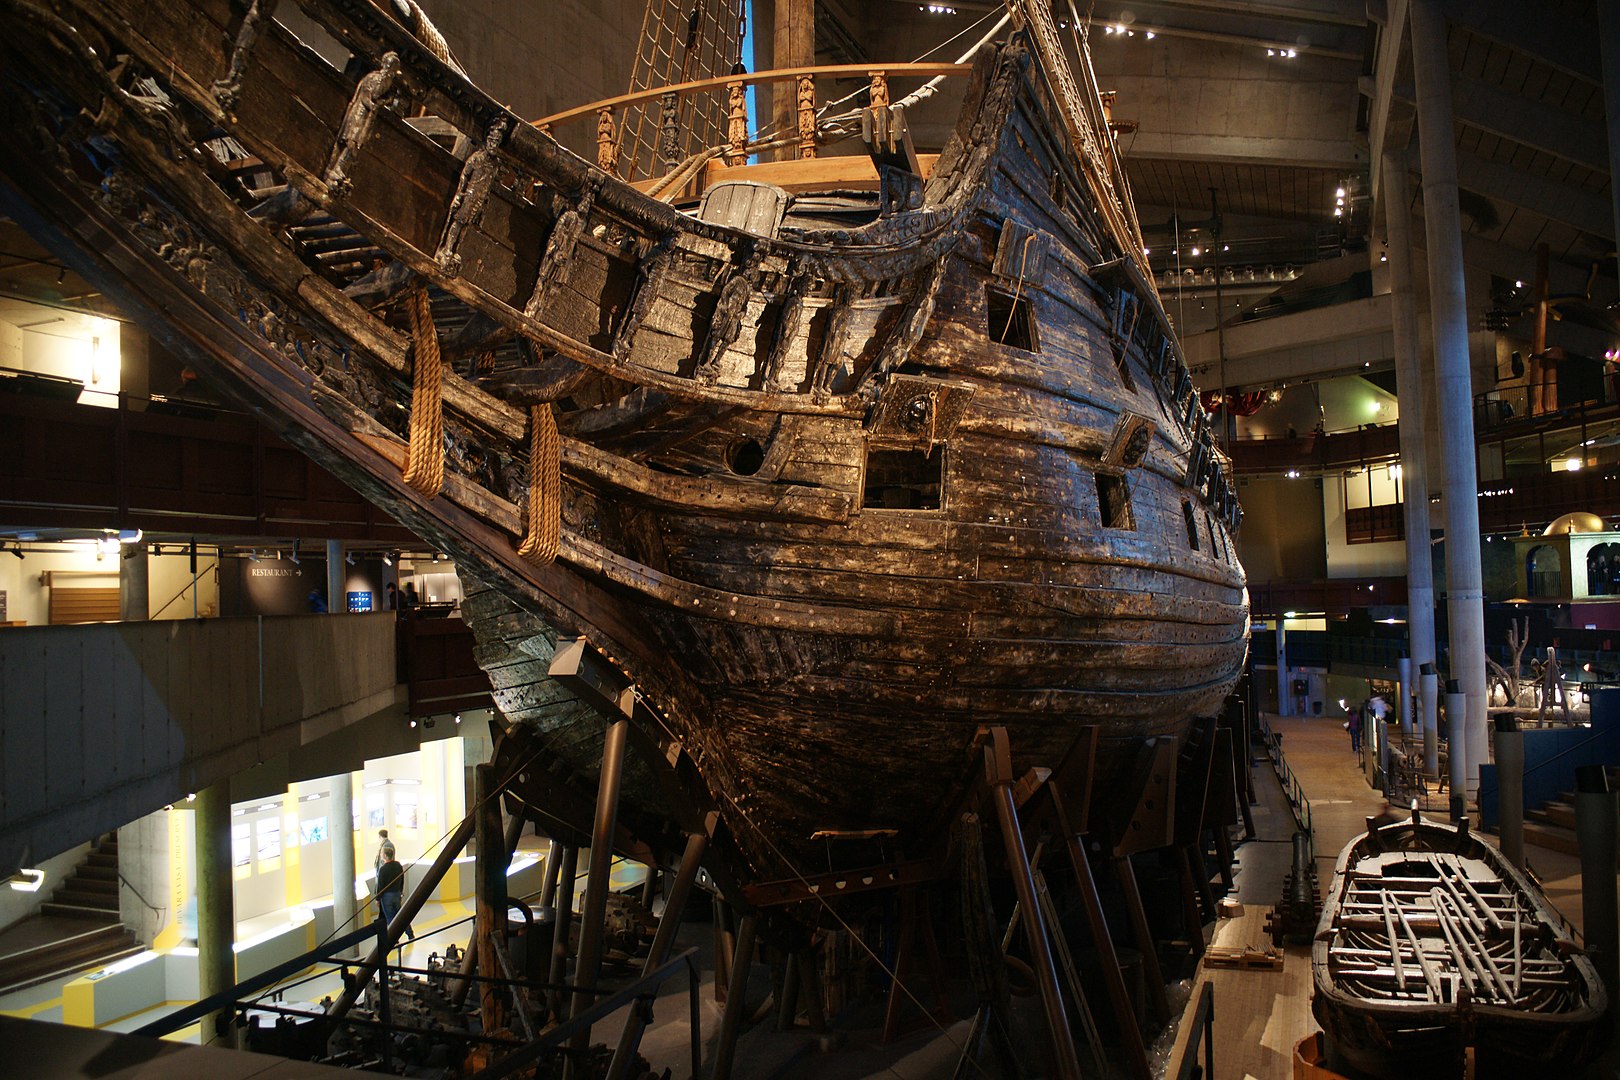 https://thebulletin.org/wp-content/uploads/2023/01/Vasa_from_the_Bow-150x150.jpg